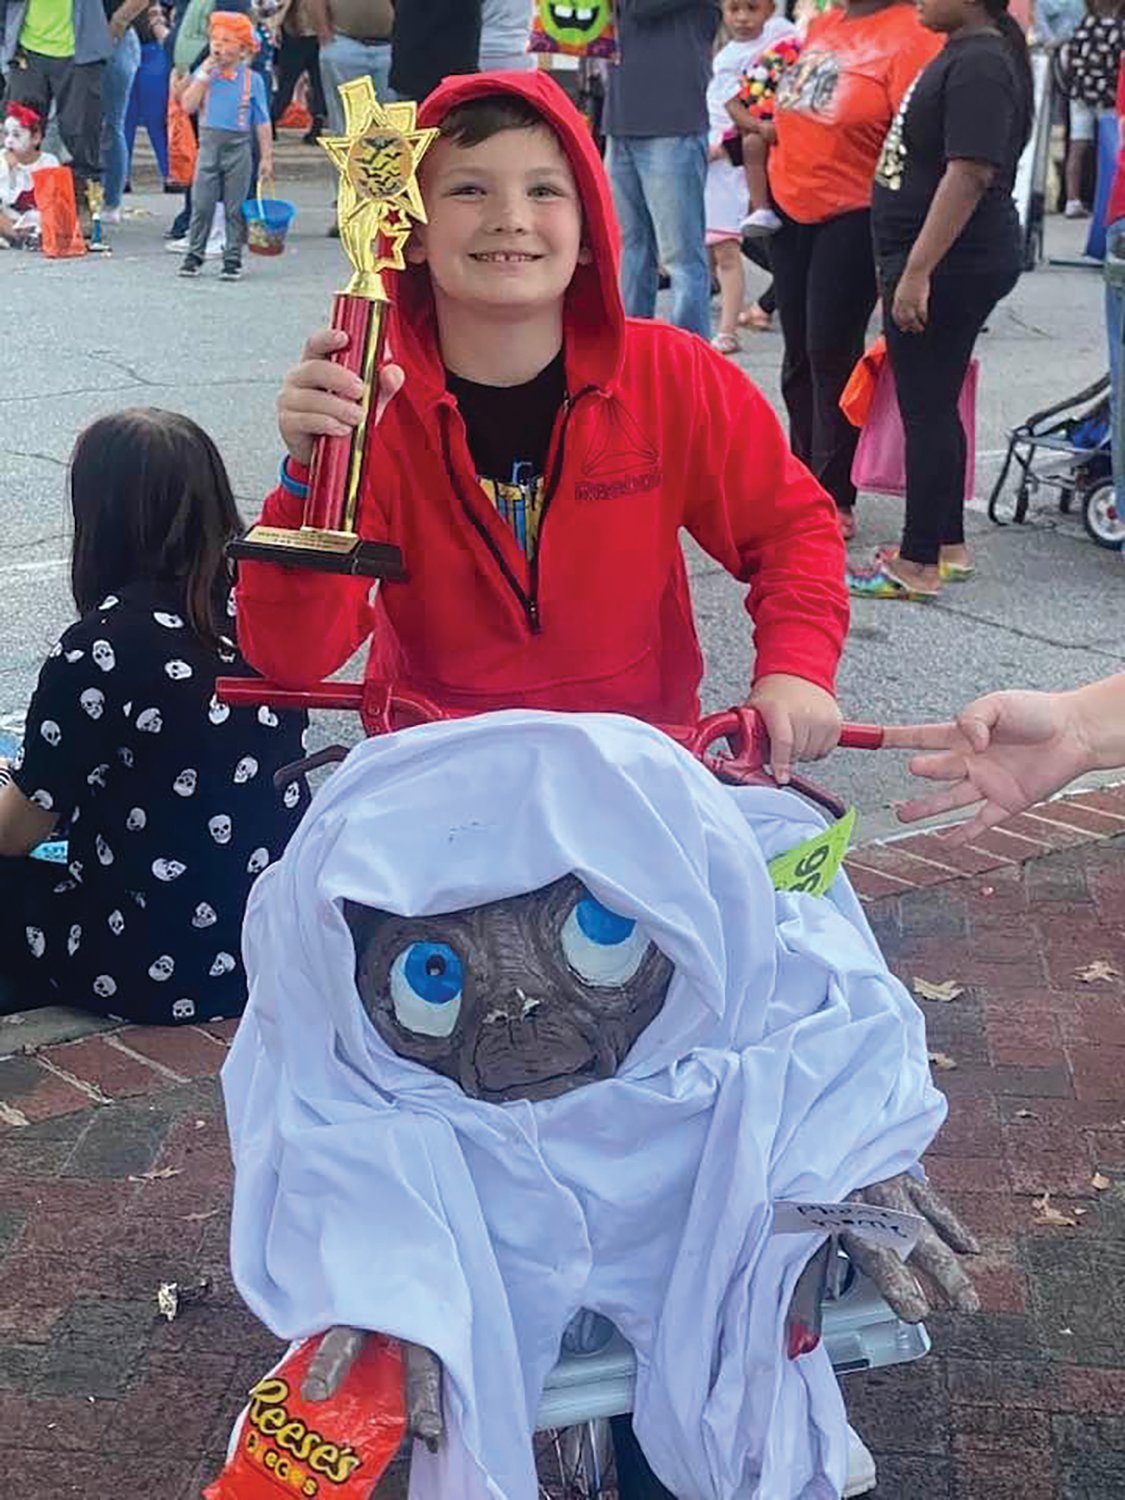 RYDER WITH HIS 1ST PLACE TROPHY AT SWAINSBORO’S FALL FESTIVAL